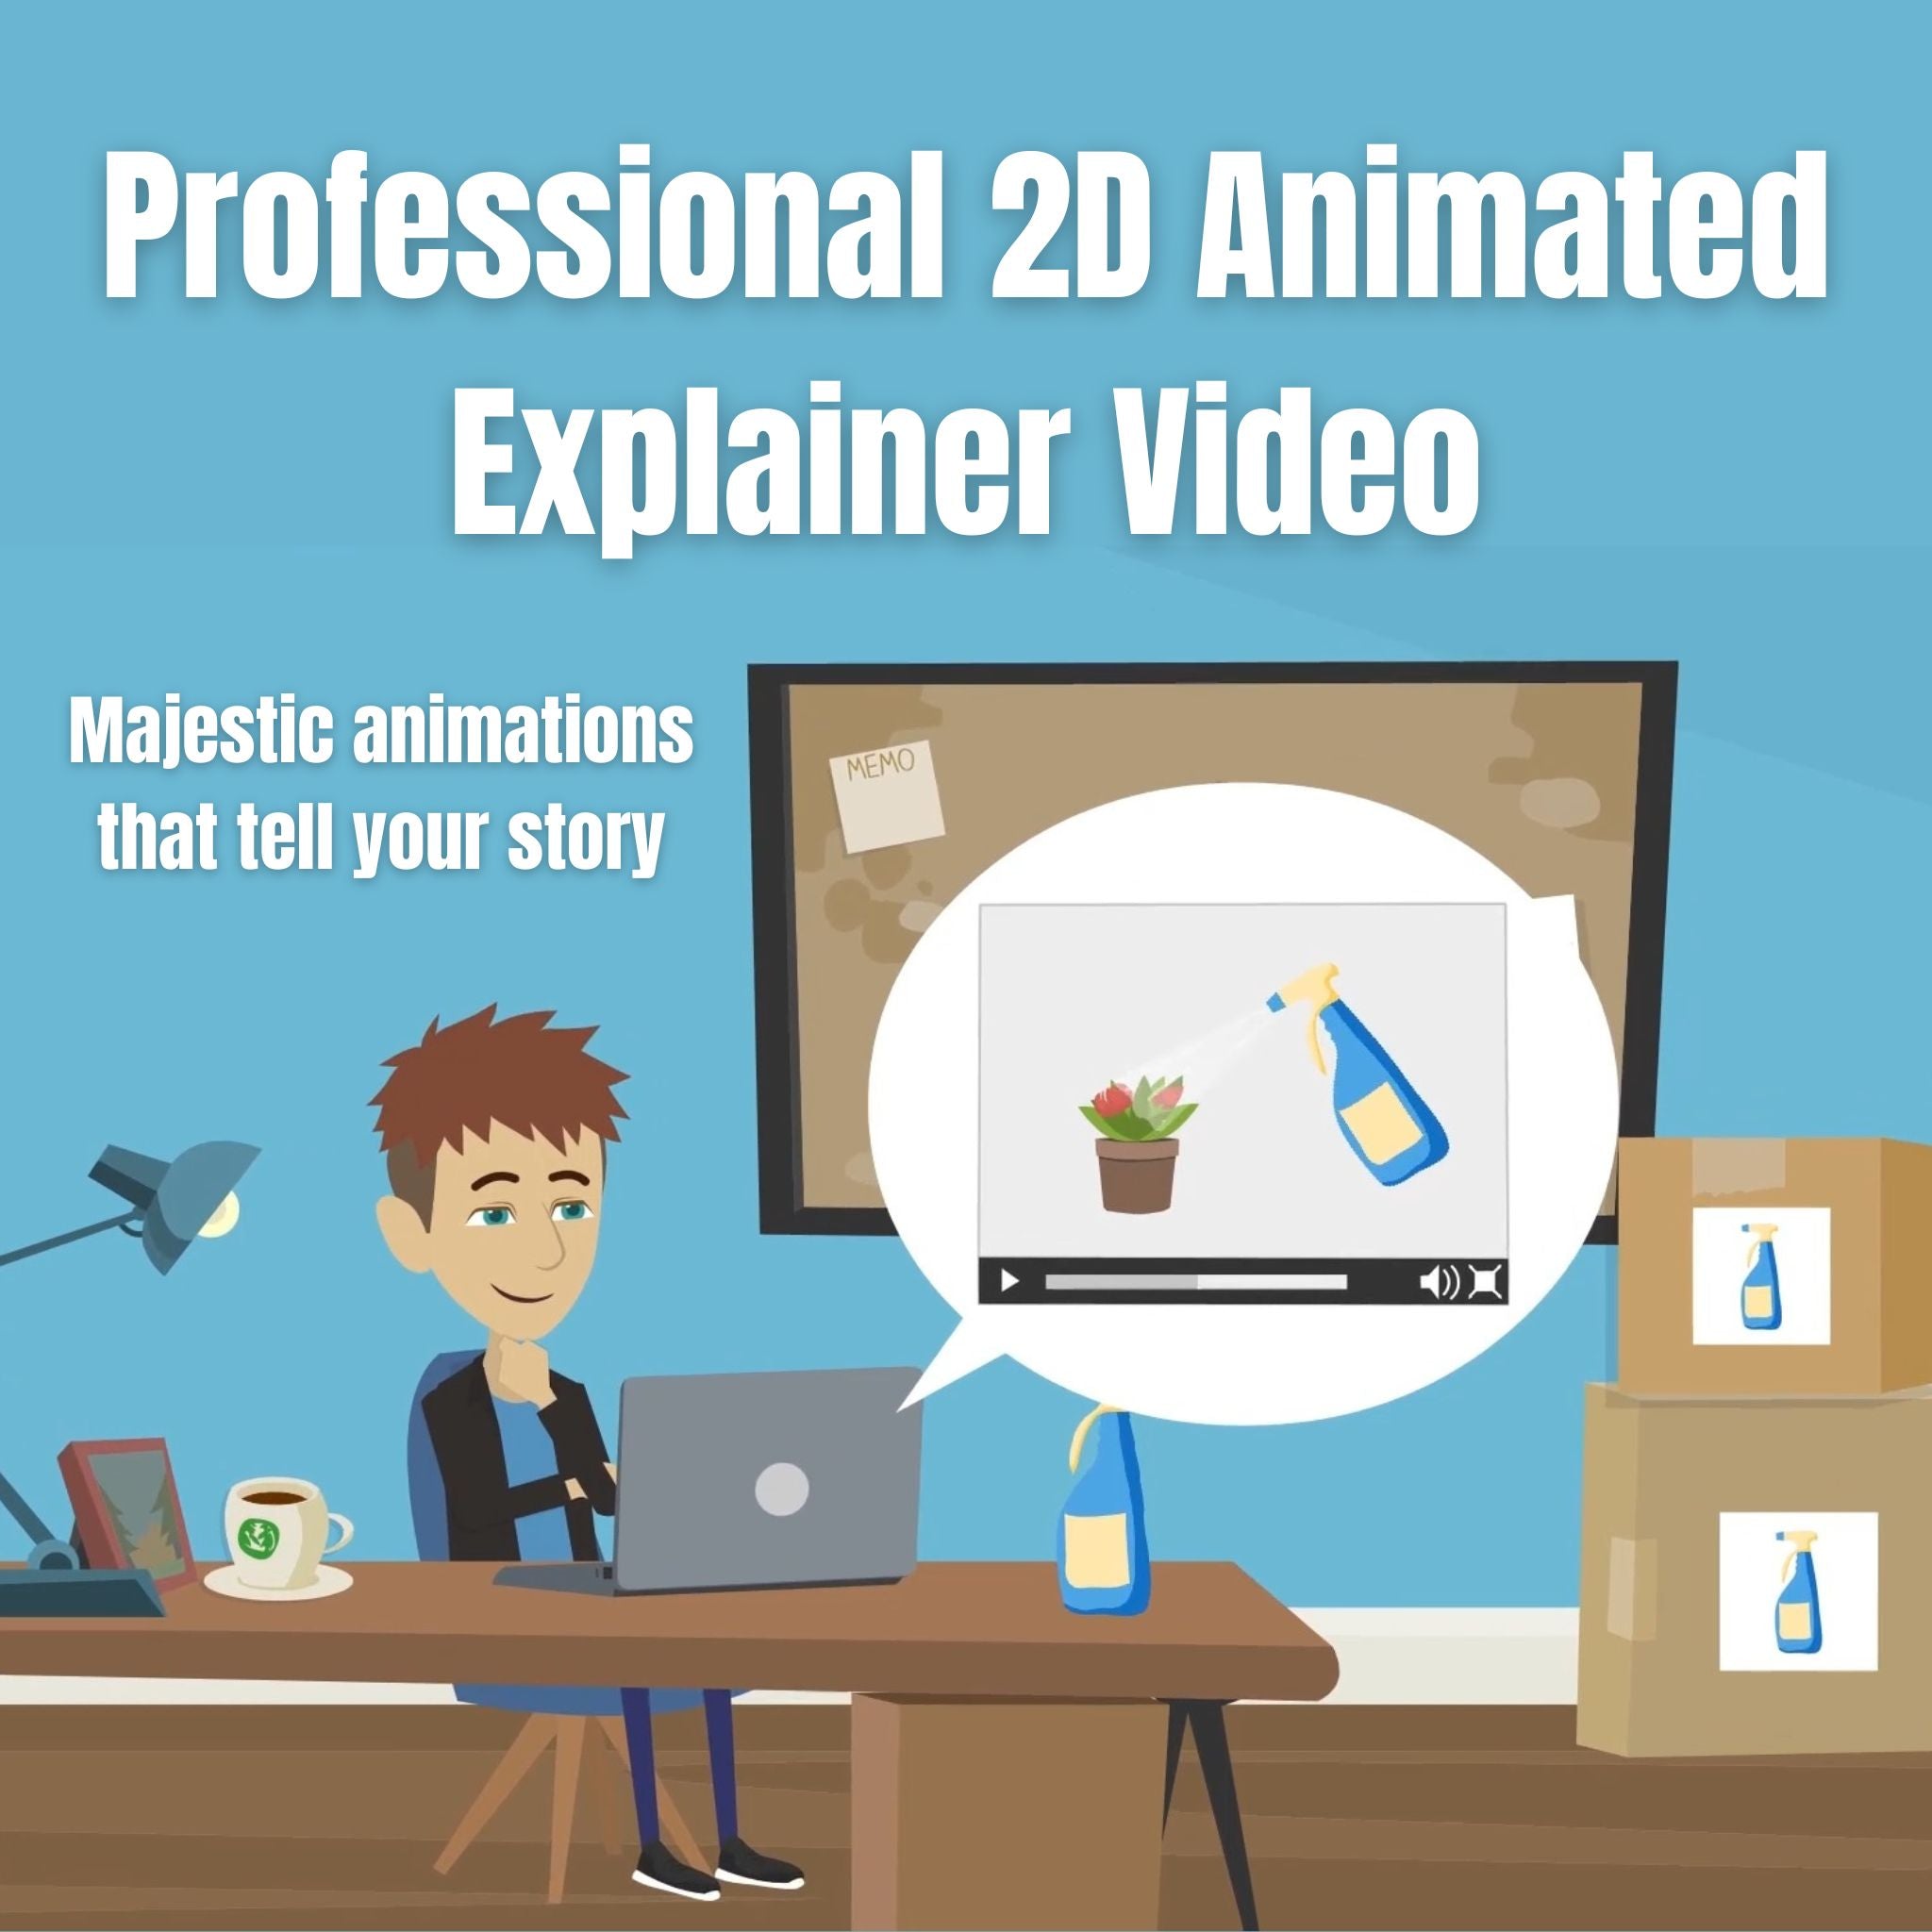 Professional 2D Animated Explainer Video